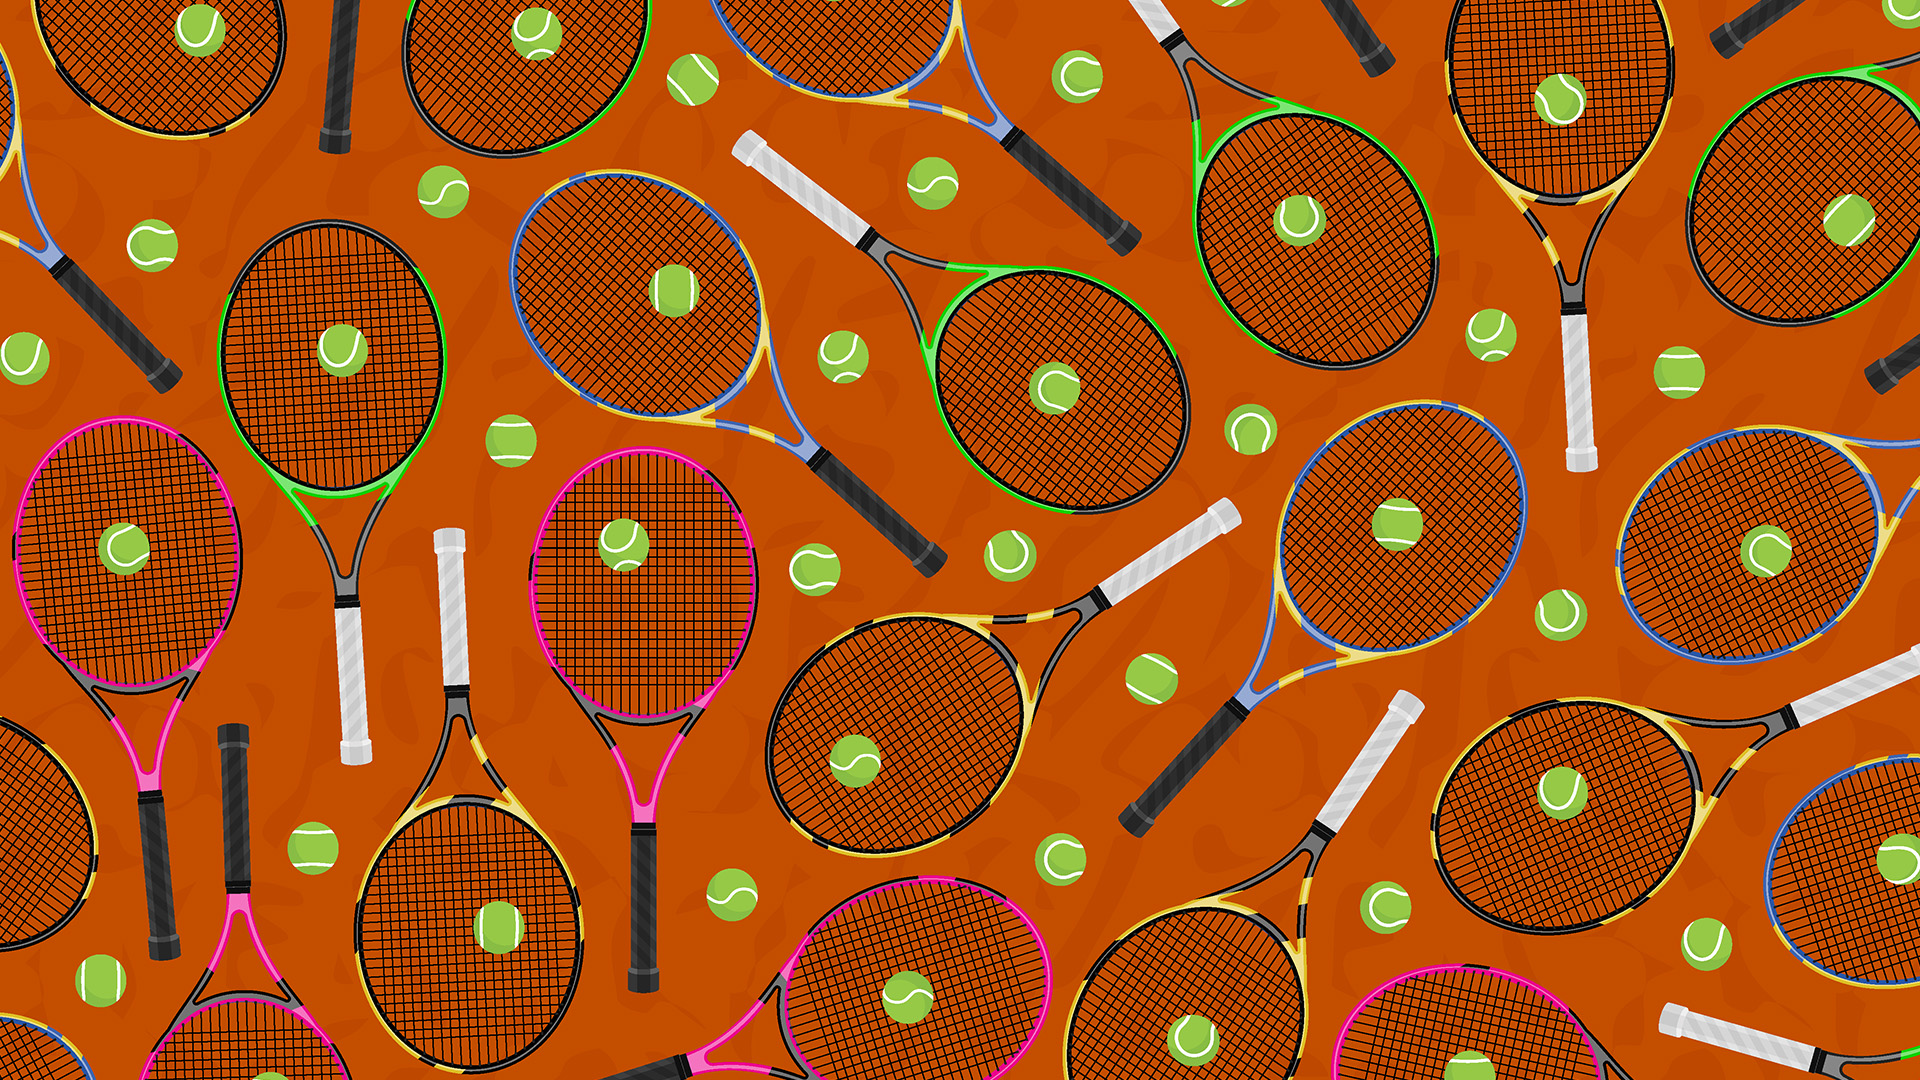 Everyone can see the tennis balls – but you have 20/20 vision and a high IQ if you can spot the hidden destroyed racket [Video]